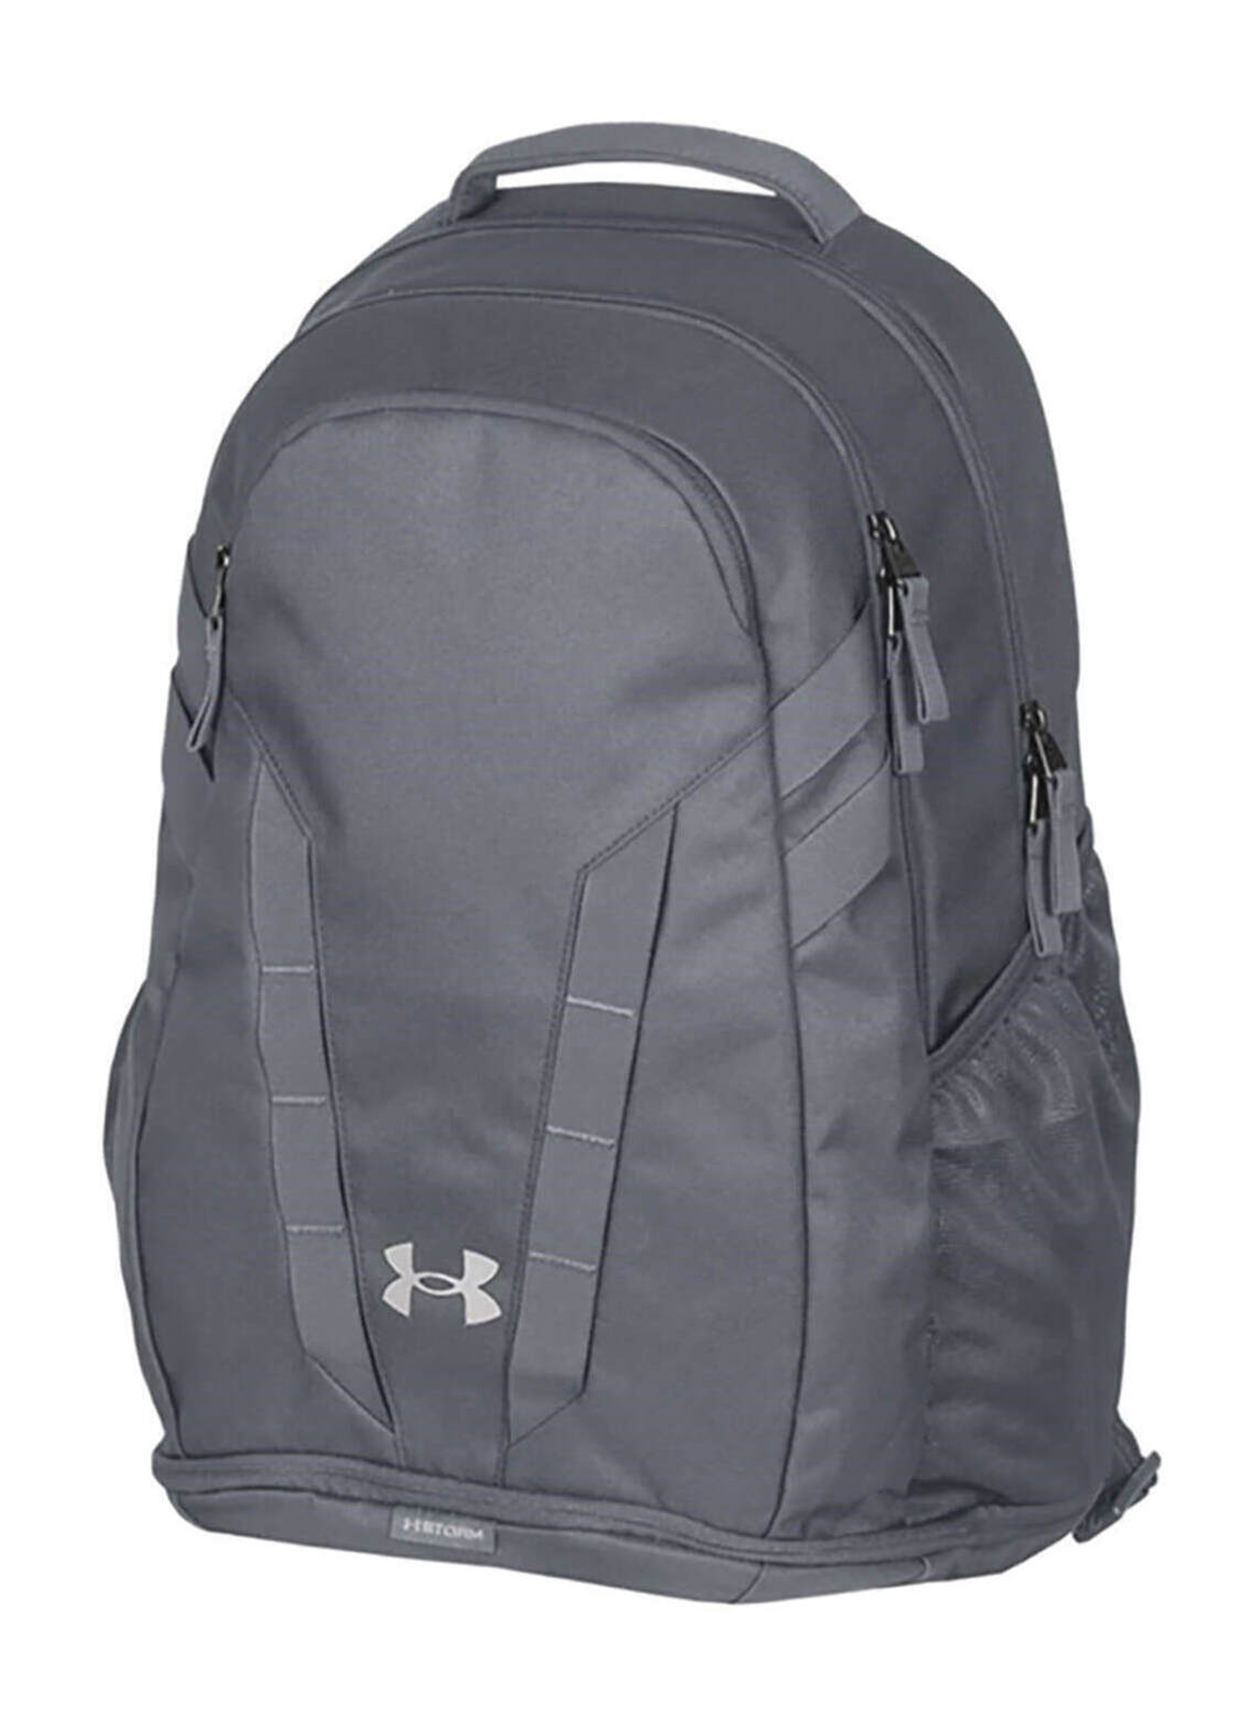 Under Armour Storm Backpack - Gray Black White Lots of pockets, great  quality